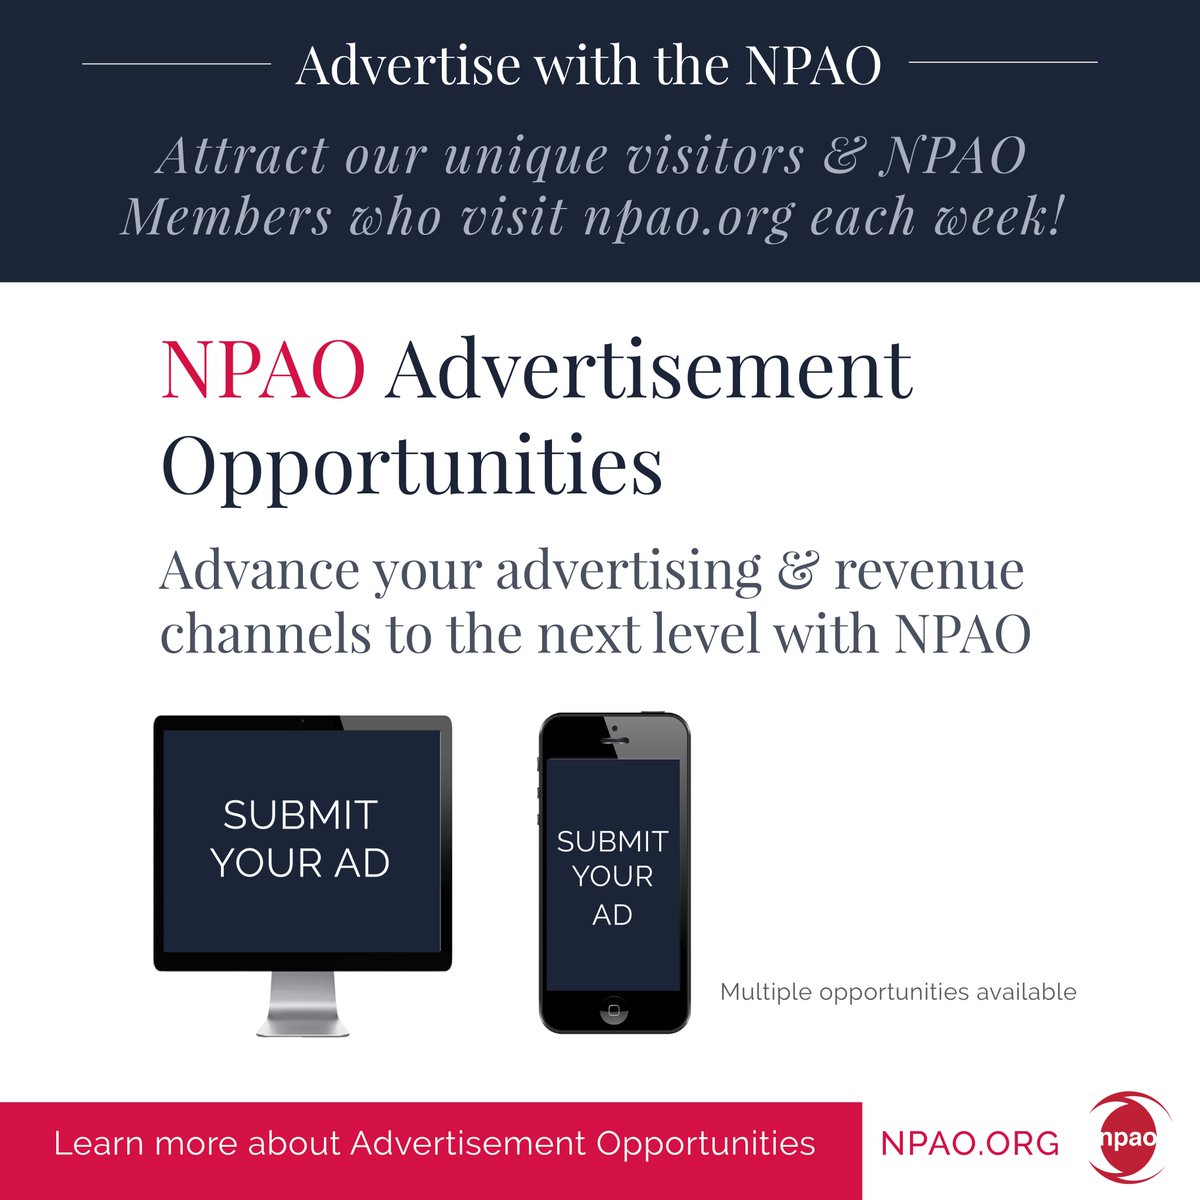 Elevate your brand with NPAO! Reach our engaged audience of unique visitors and NPAO Members on npao.org each week. Expand your advertising and revenue opportunities today! Learn more at npao.org. #NPAO #Advertising #RevenueGrowth